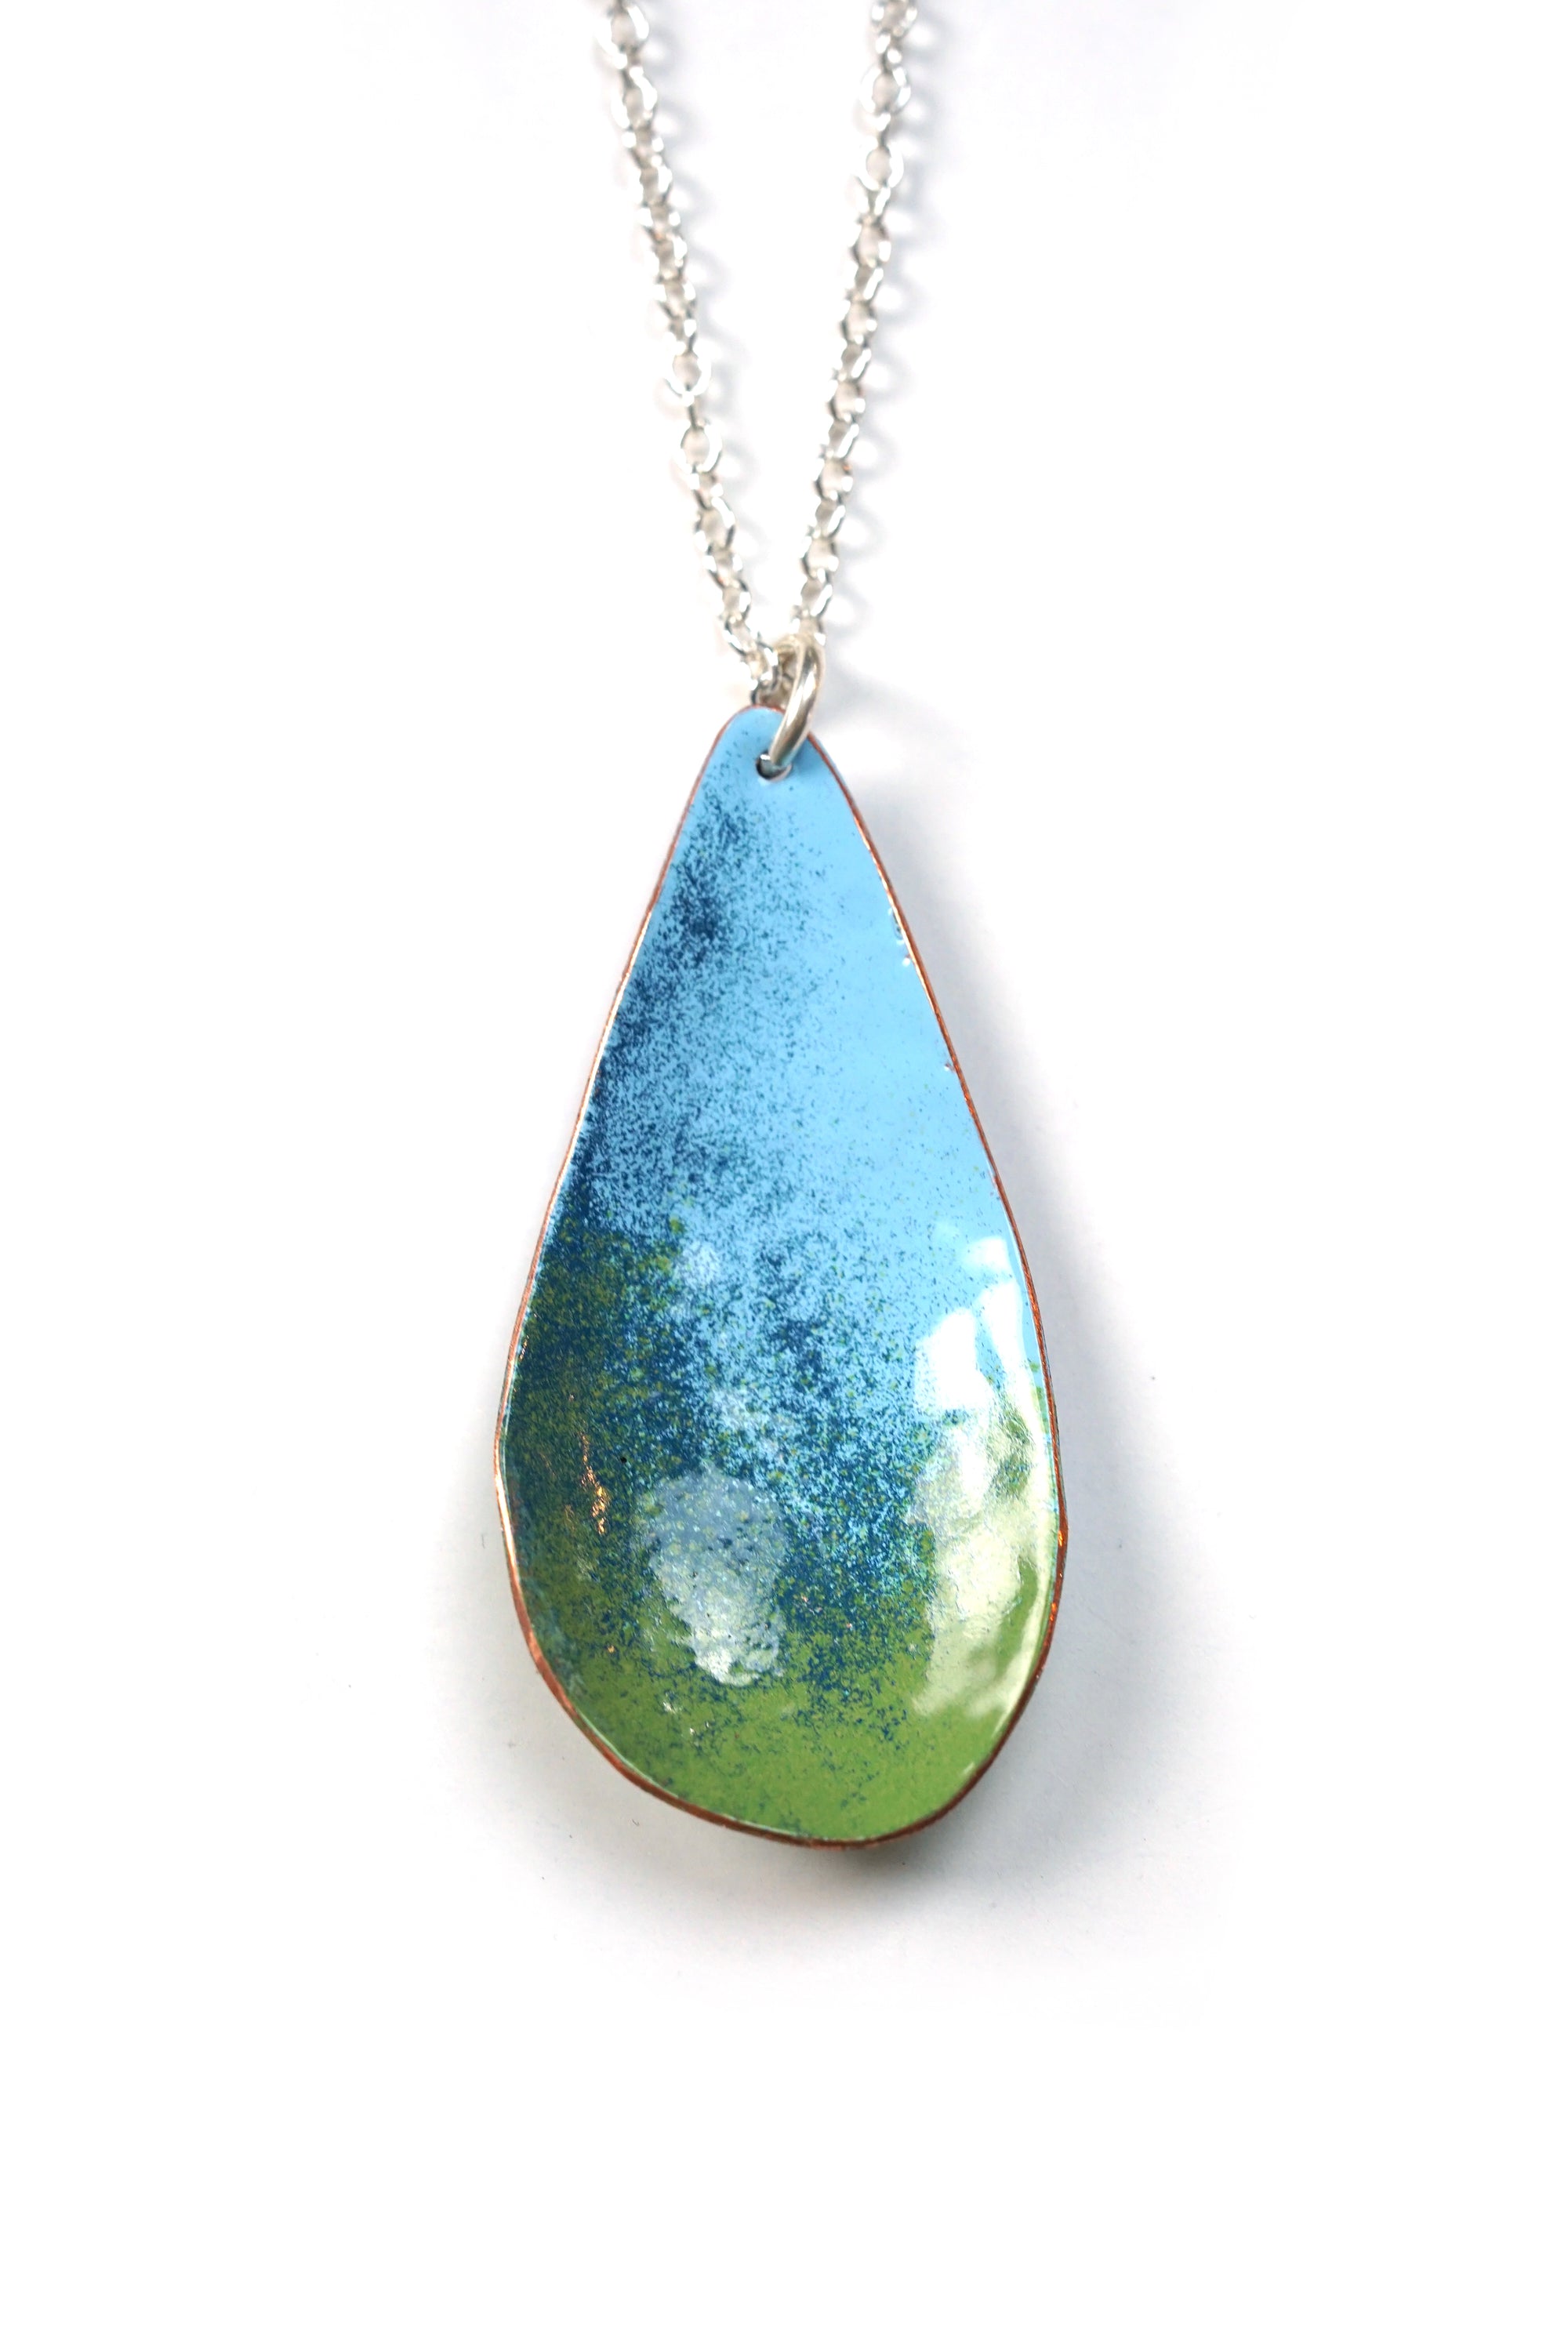 Chroma Pendant in Light Blue and Earth Green